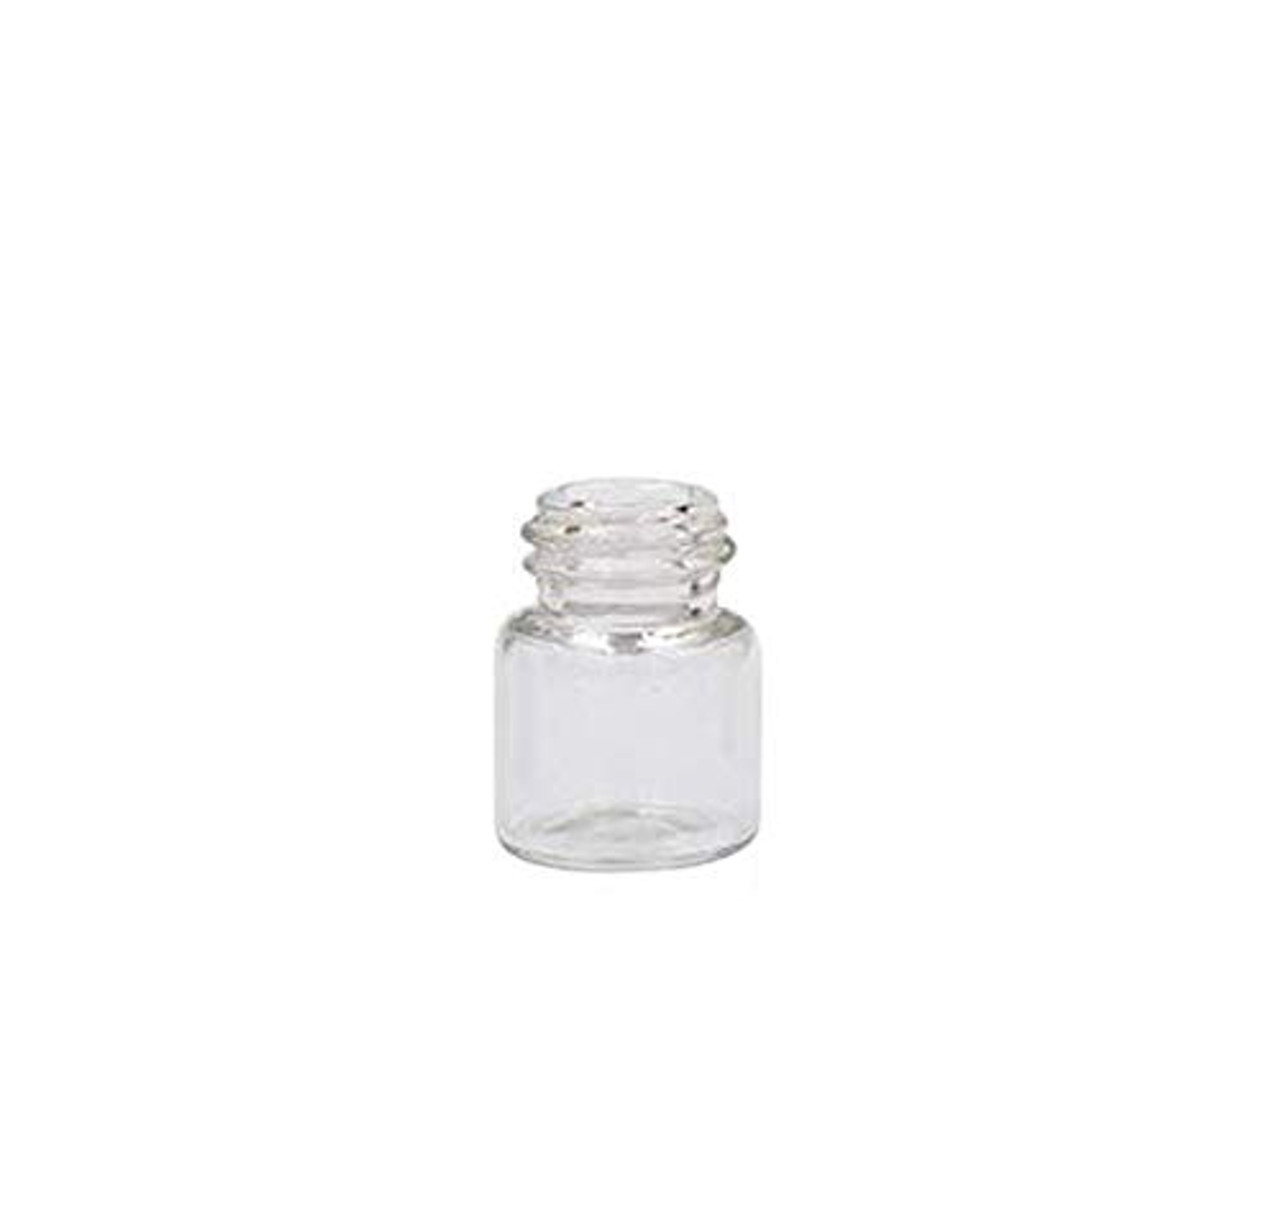 Enslz 100pcs Perfume Samples Mini Bottles with Black Lid Empty Glass Vials Dropper Bottle for Travel and Party (3ml)